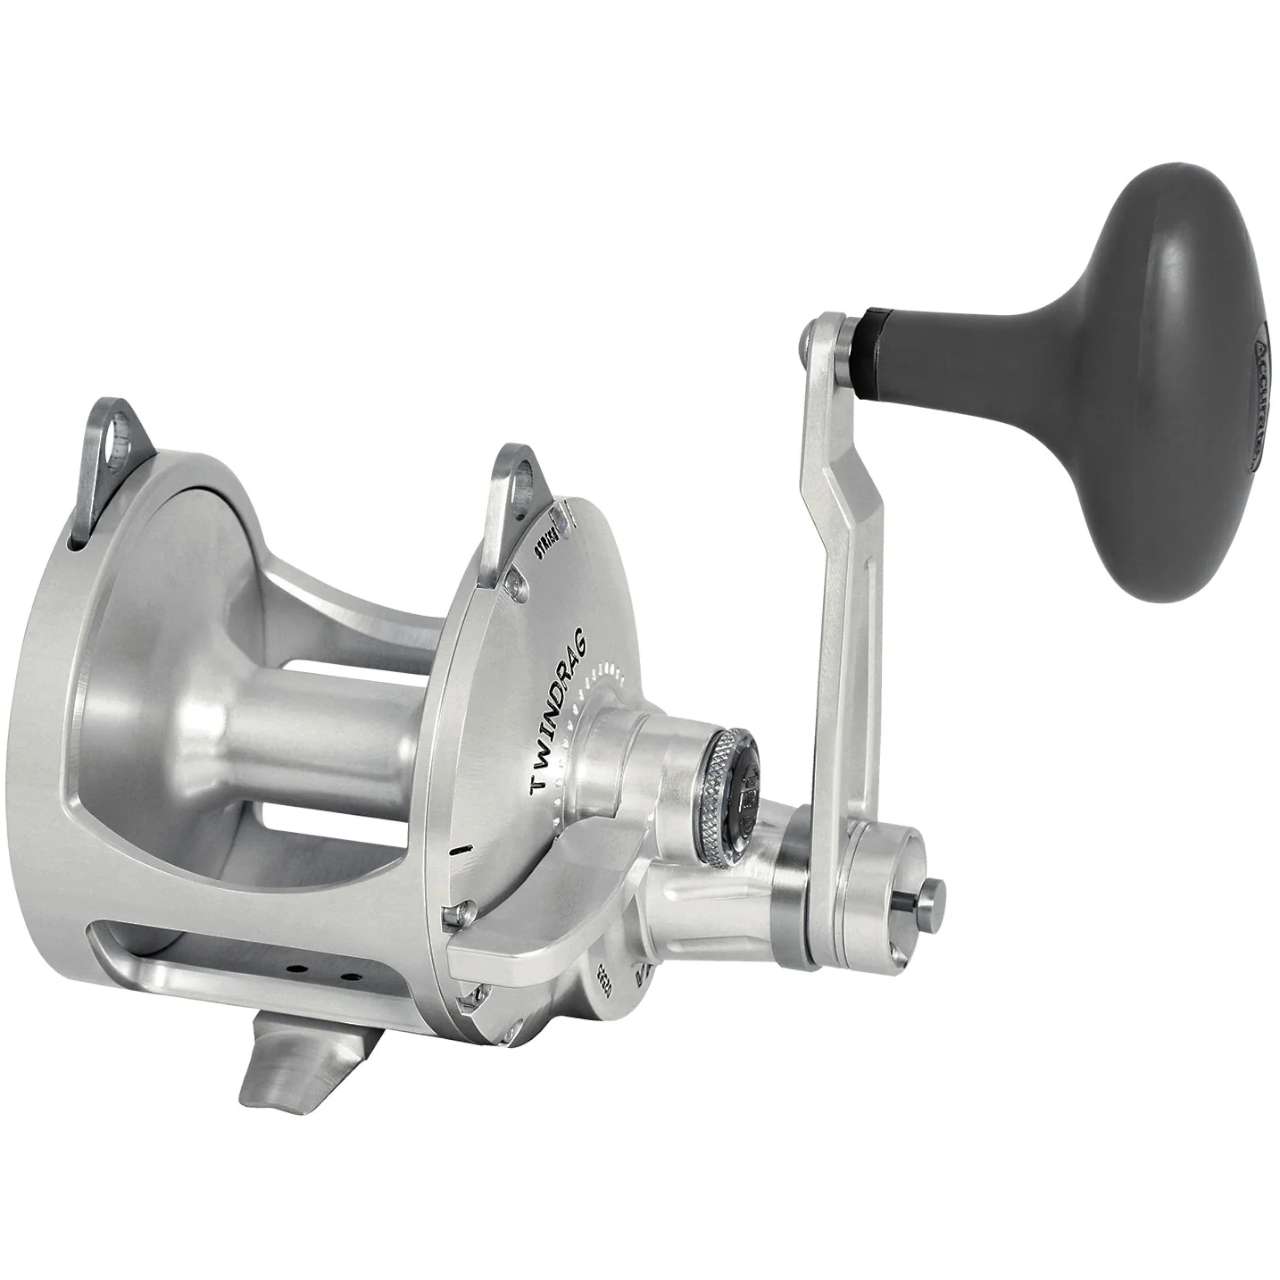 Accurate Valiant 2 Speed Conventional Reel BV2-800L-S